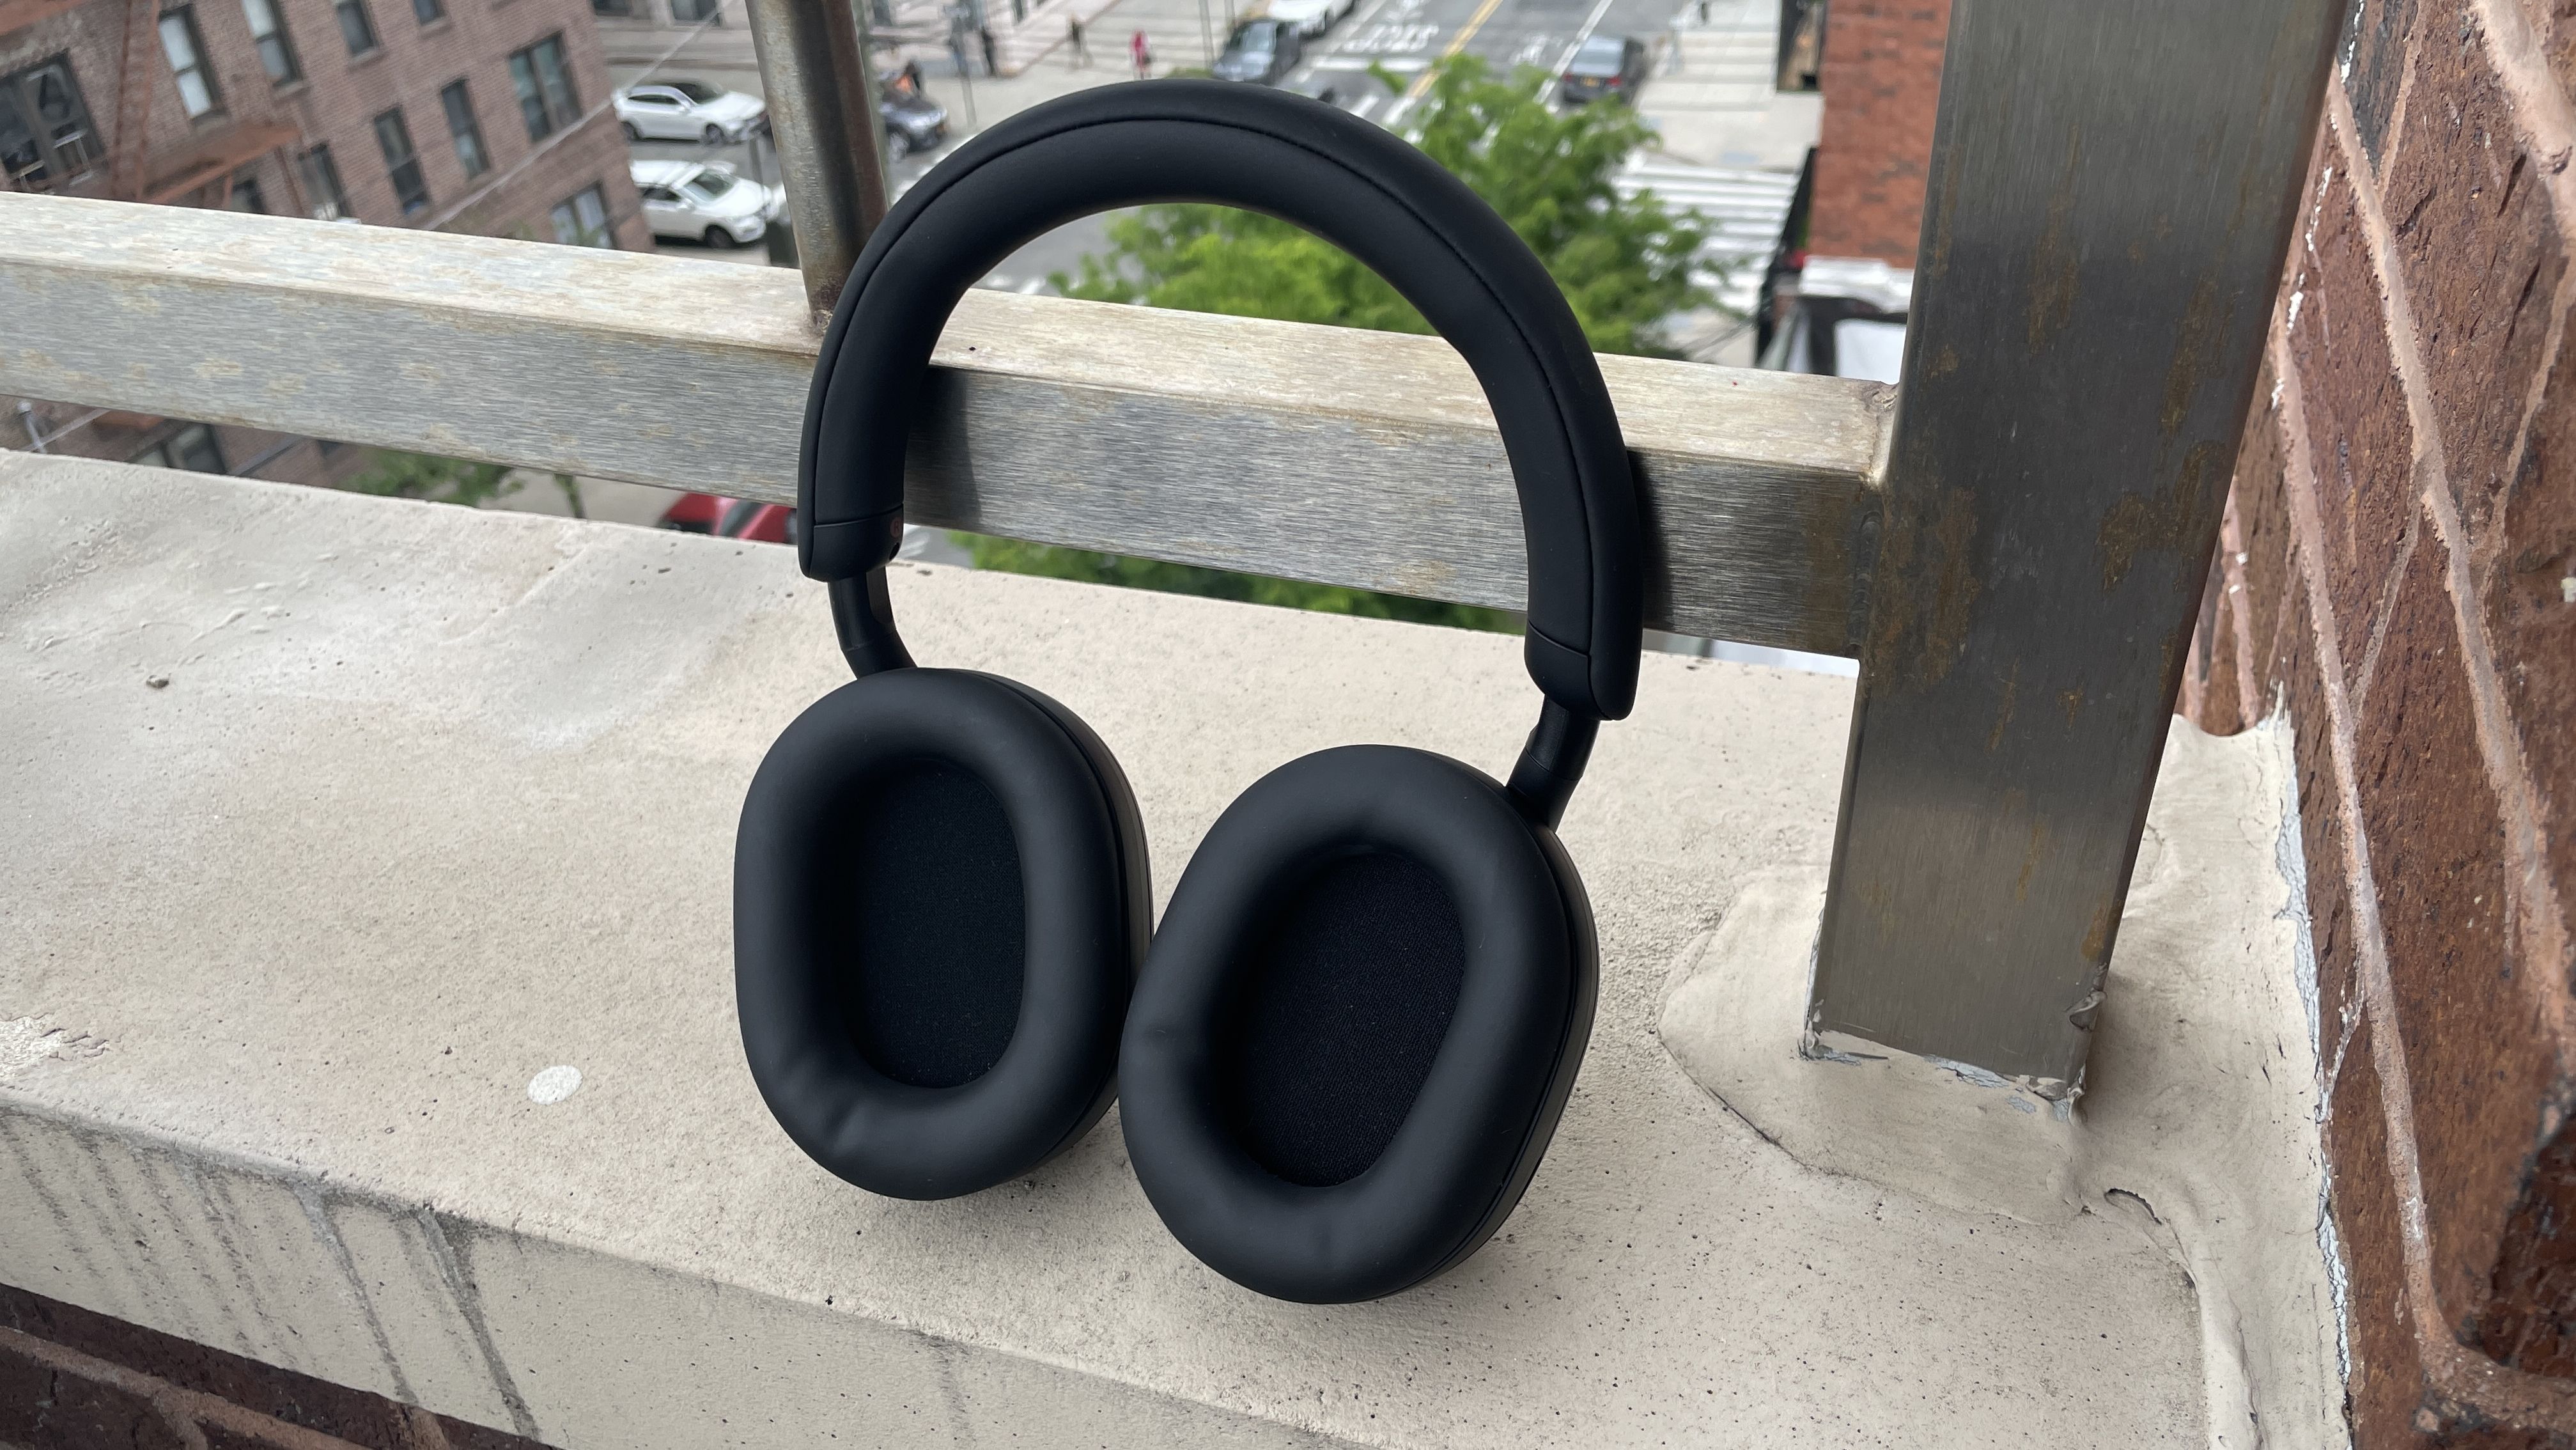 Sony WH-1000XM5 review: Is the best ANC on the market worth $340?